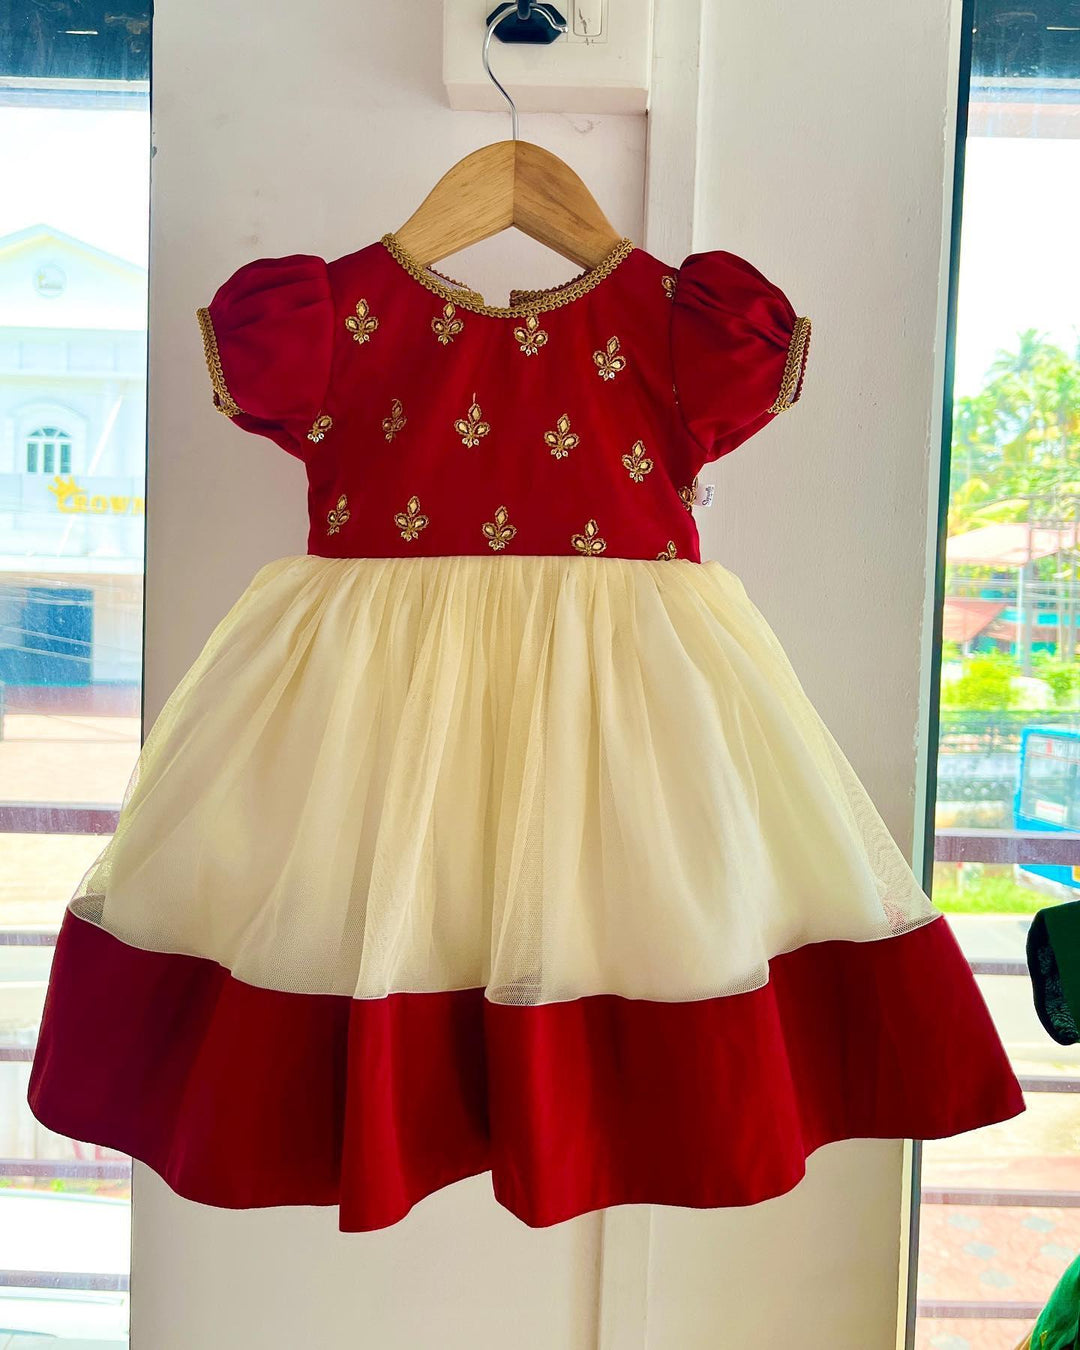 Cream & Meroon Traditional Embroidery Stone work Frock
Material: Meroon Taffetta silk top with golden embroidery stone work, Cream soft net skirt with matching border. Beautifully designed outfit for baby girls with smo